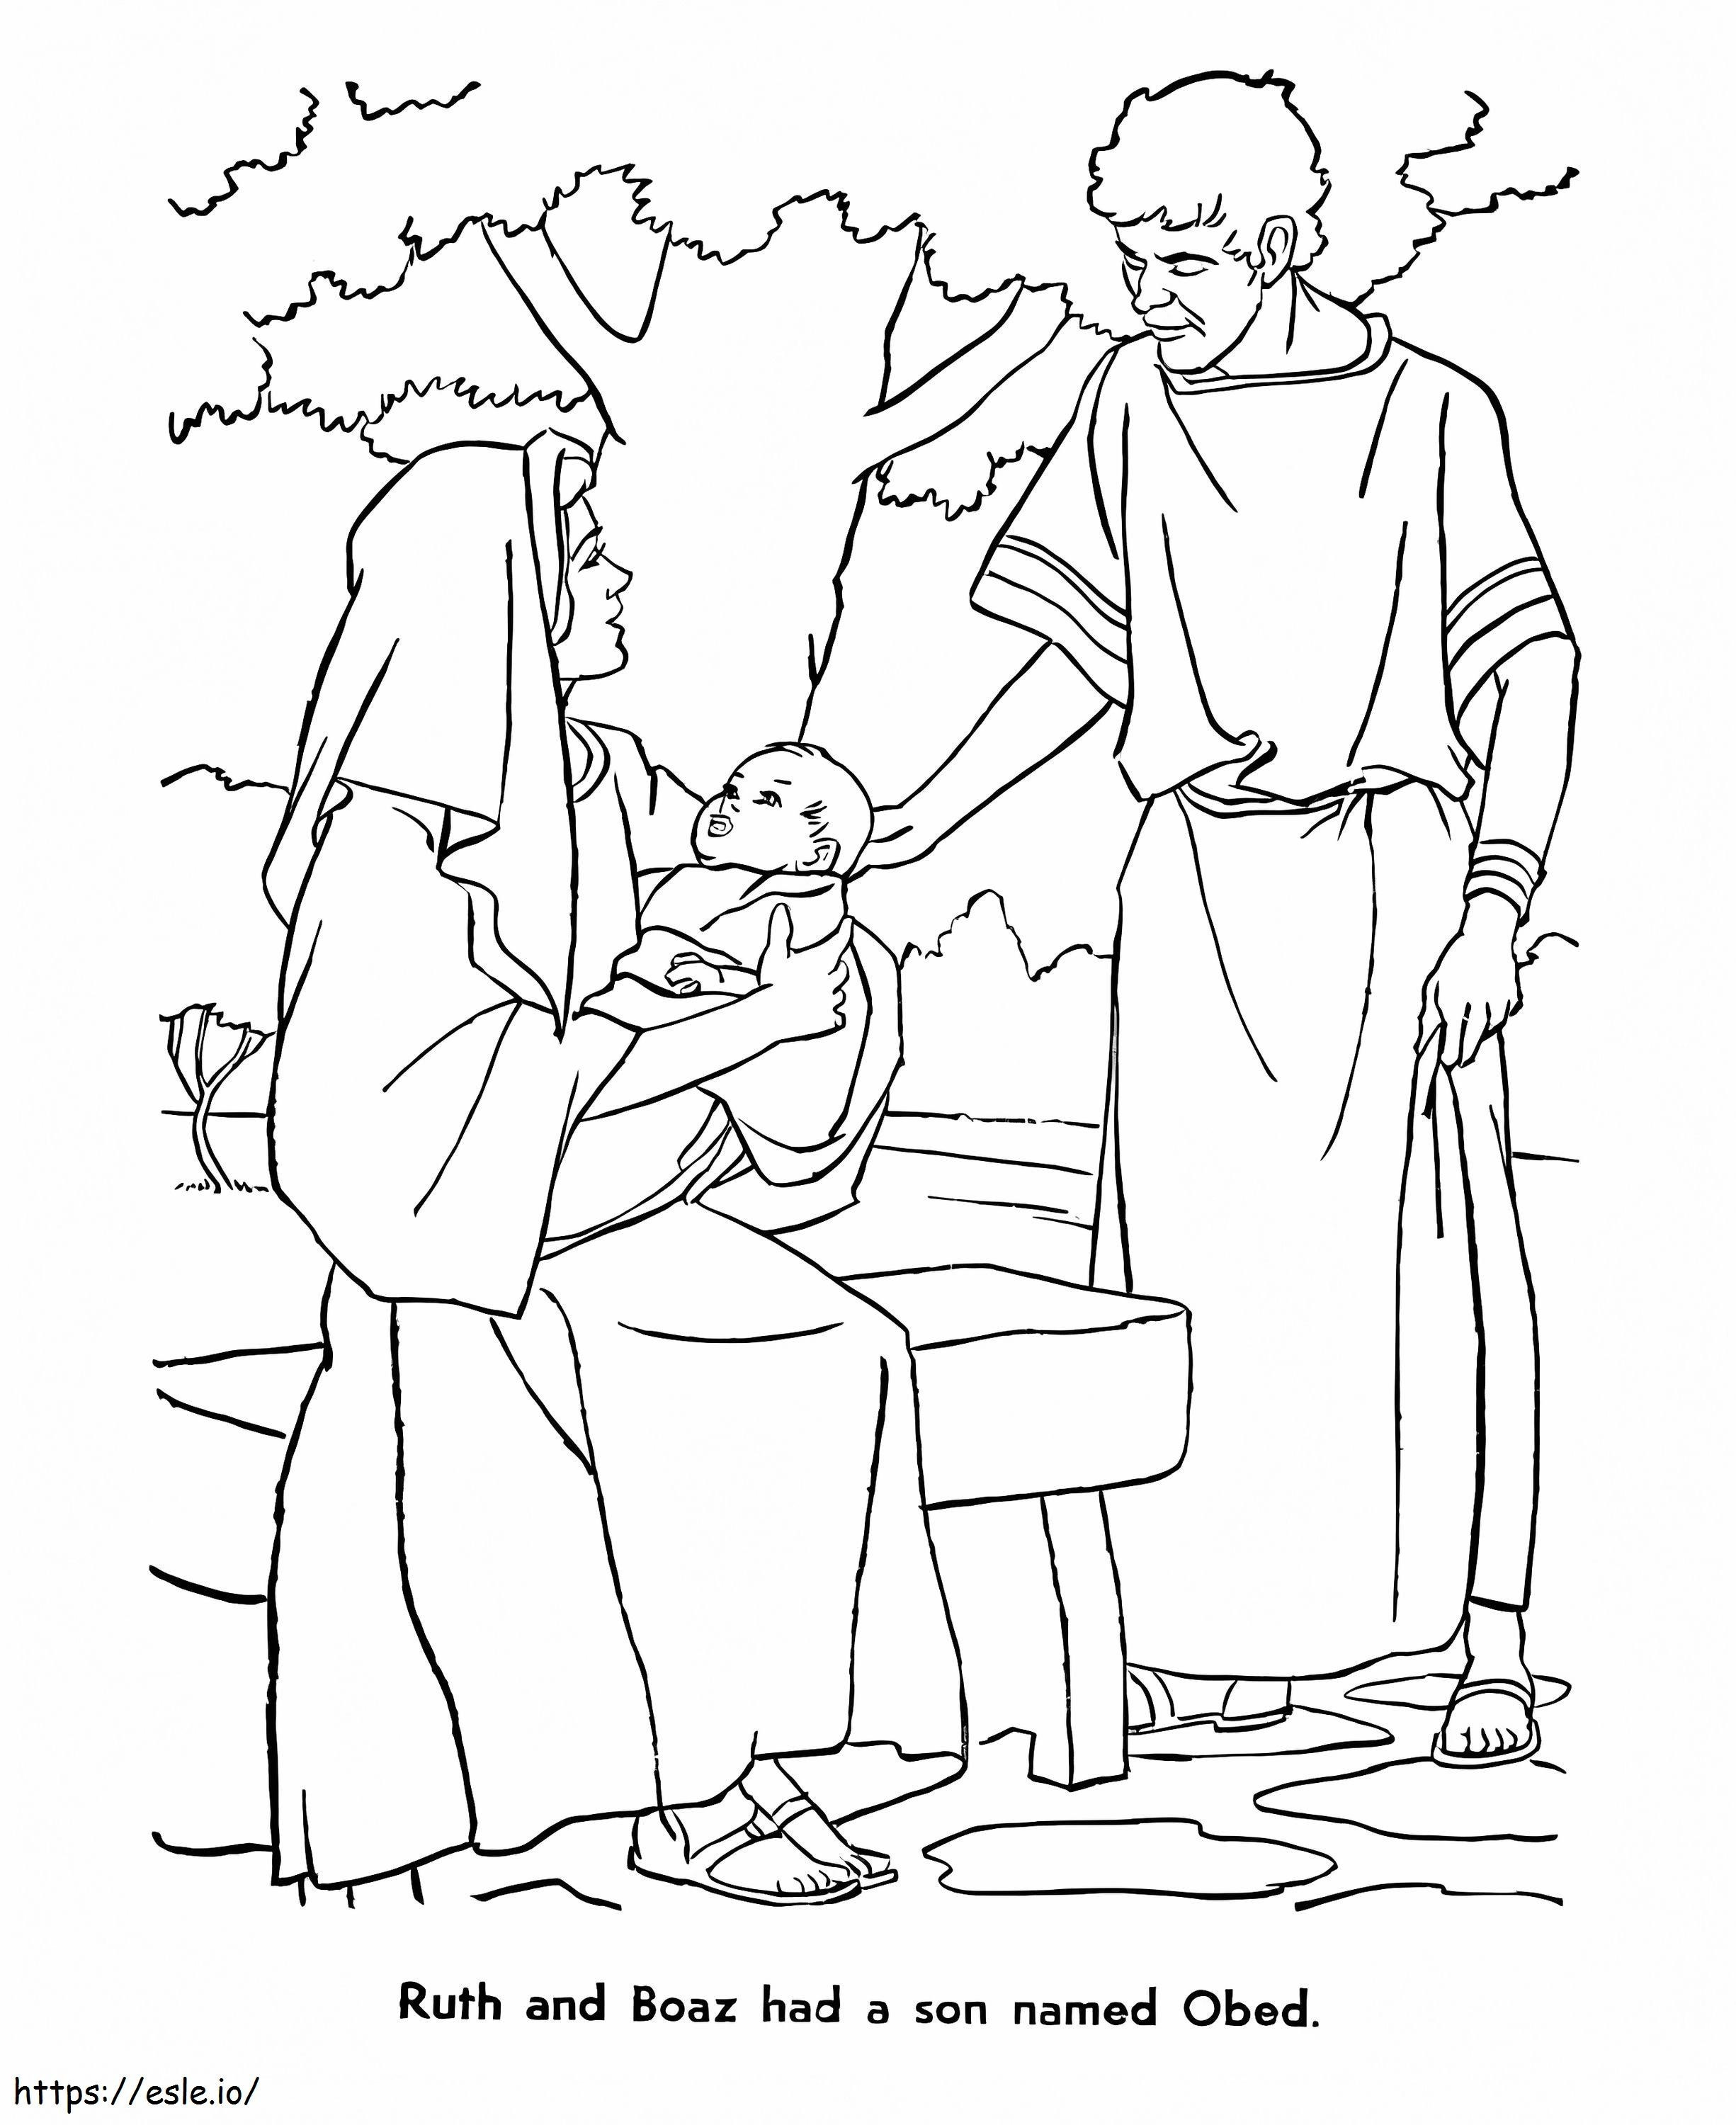 Ruth And Boaz coloring page